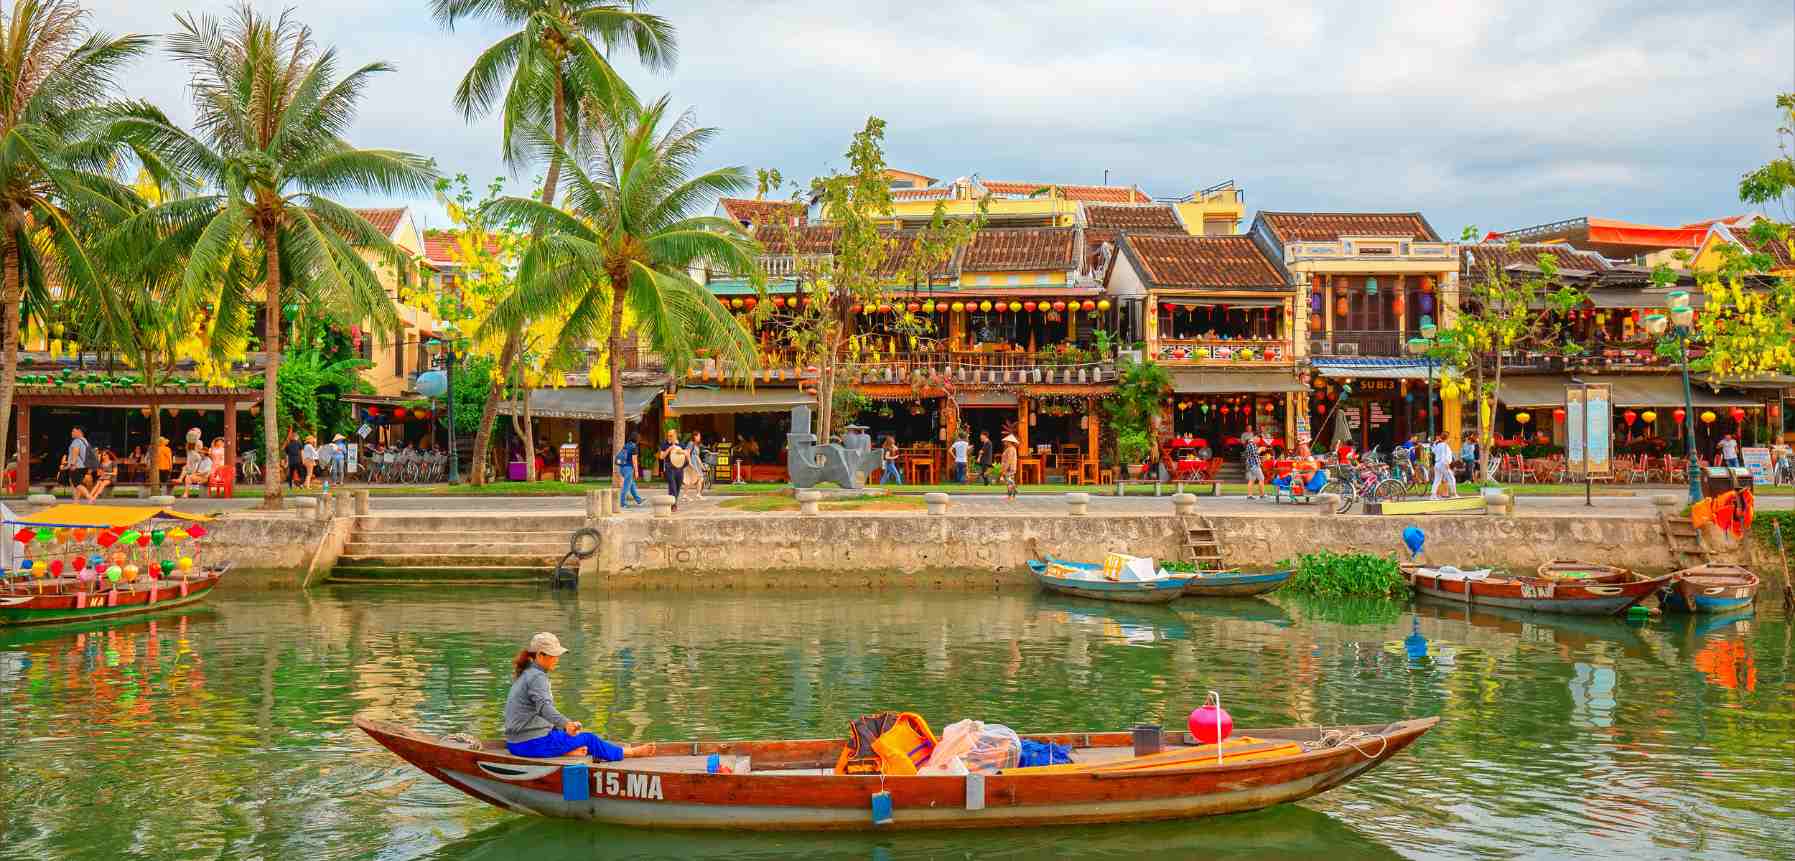 Visit the Ancient City of Hoi An